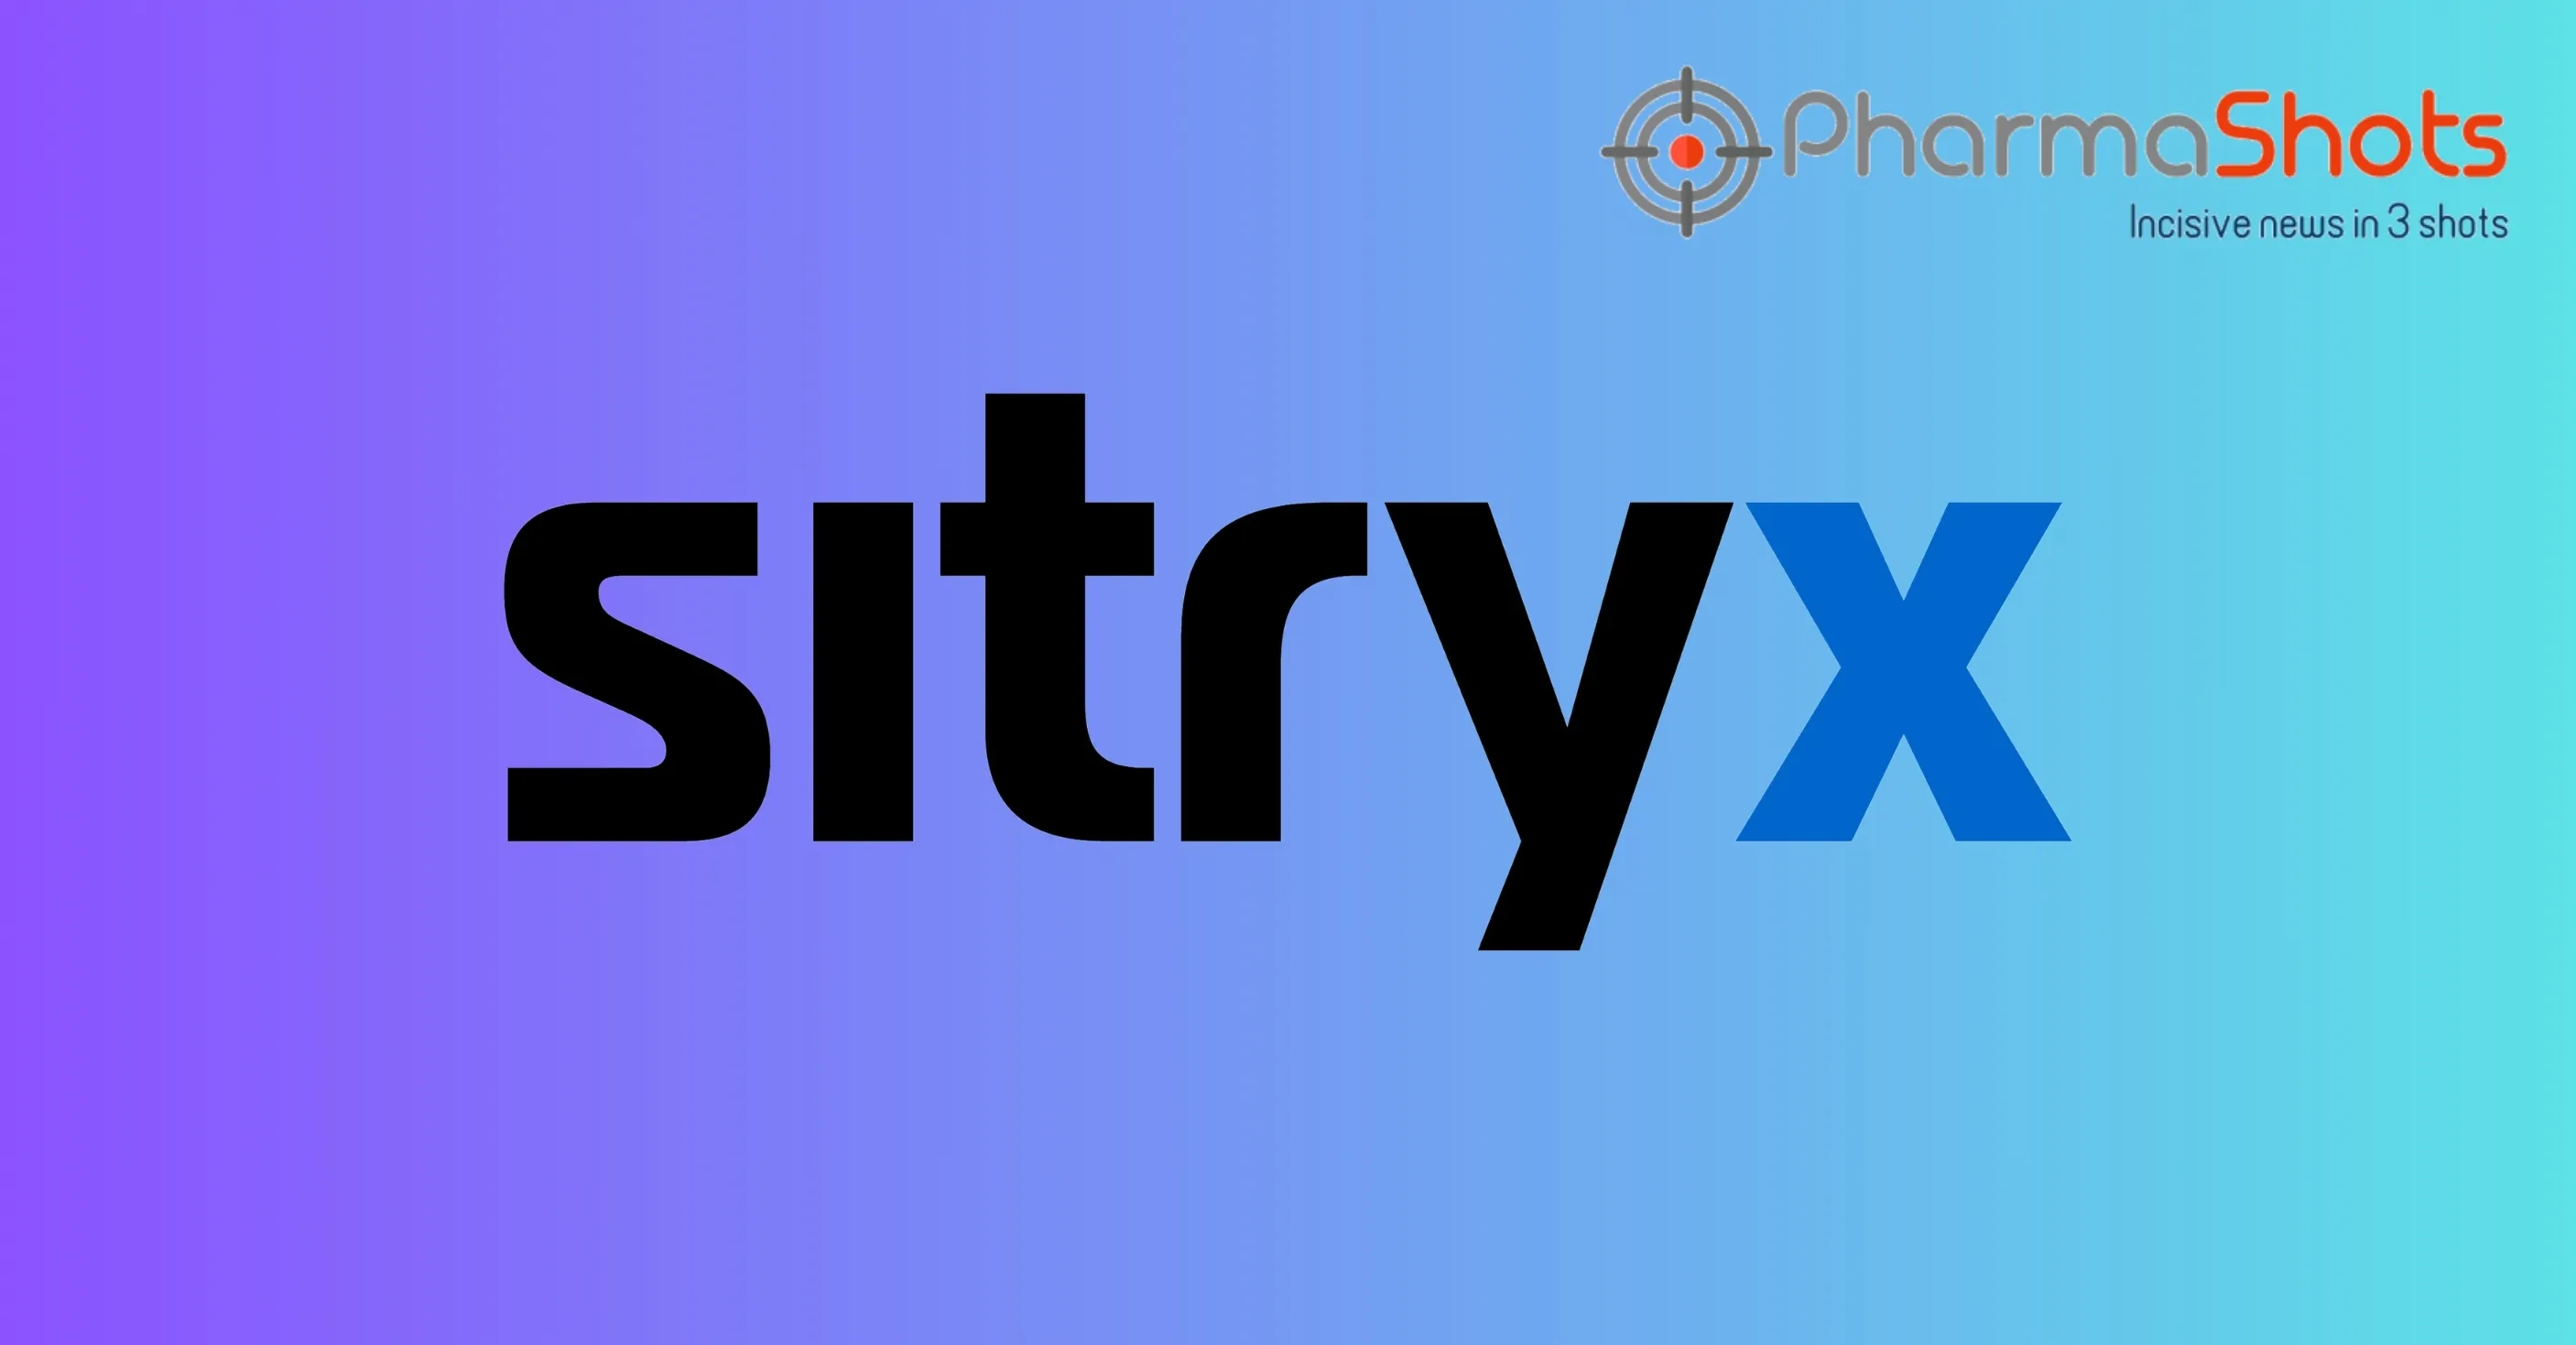 Sitryx Therapeutics Reports the Initiation of a P-I Study of SIT-011 by Eli Lilly to treat Chronic Autoimmune and Inflammatory Diseases